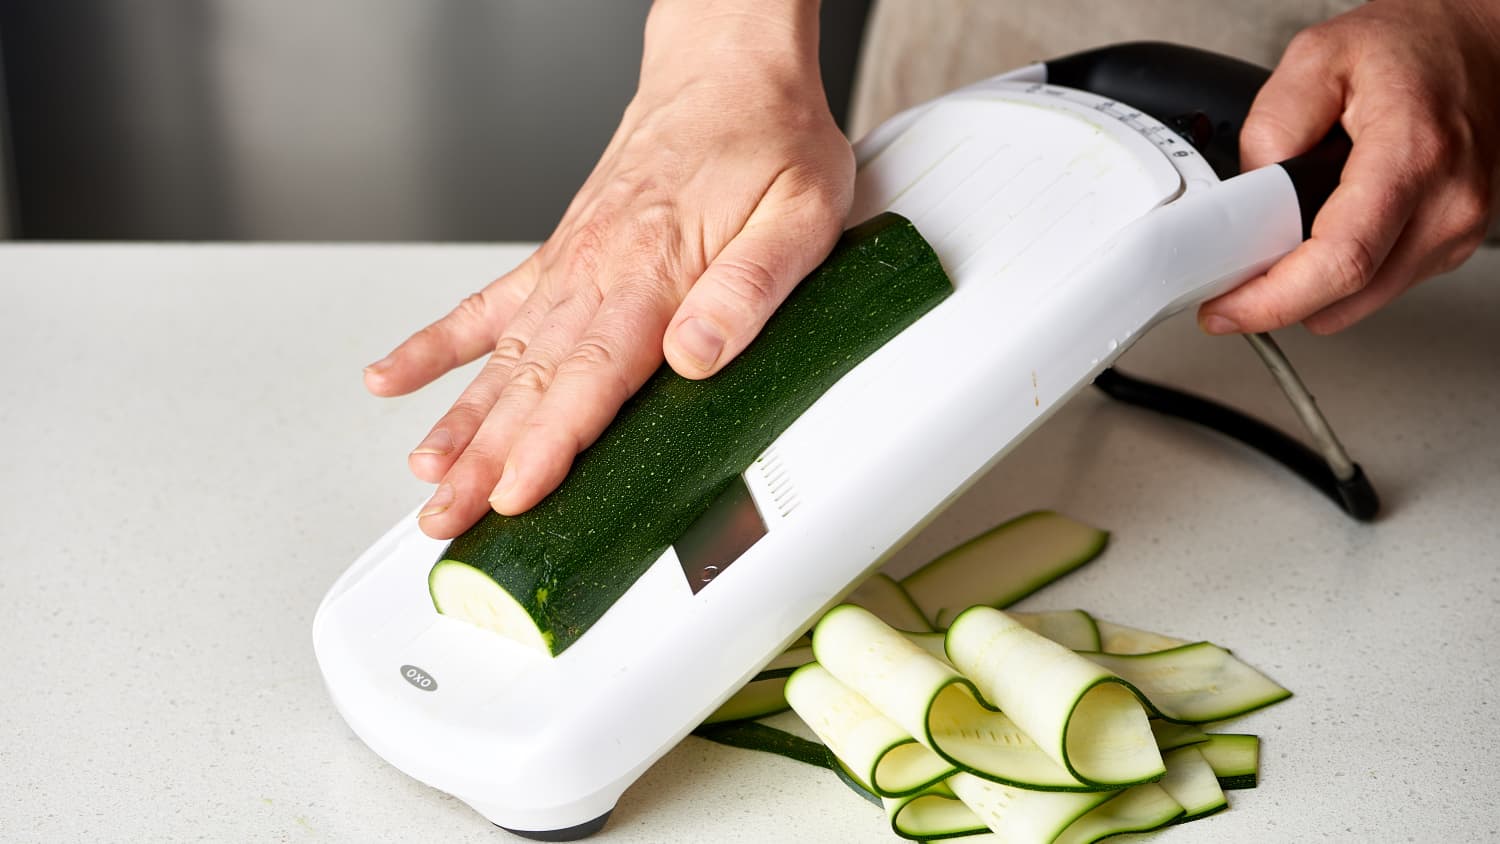 Perfectly Sliced Produce with OXO's Good Grips Hand-Held Mandoline